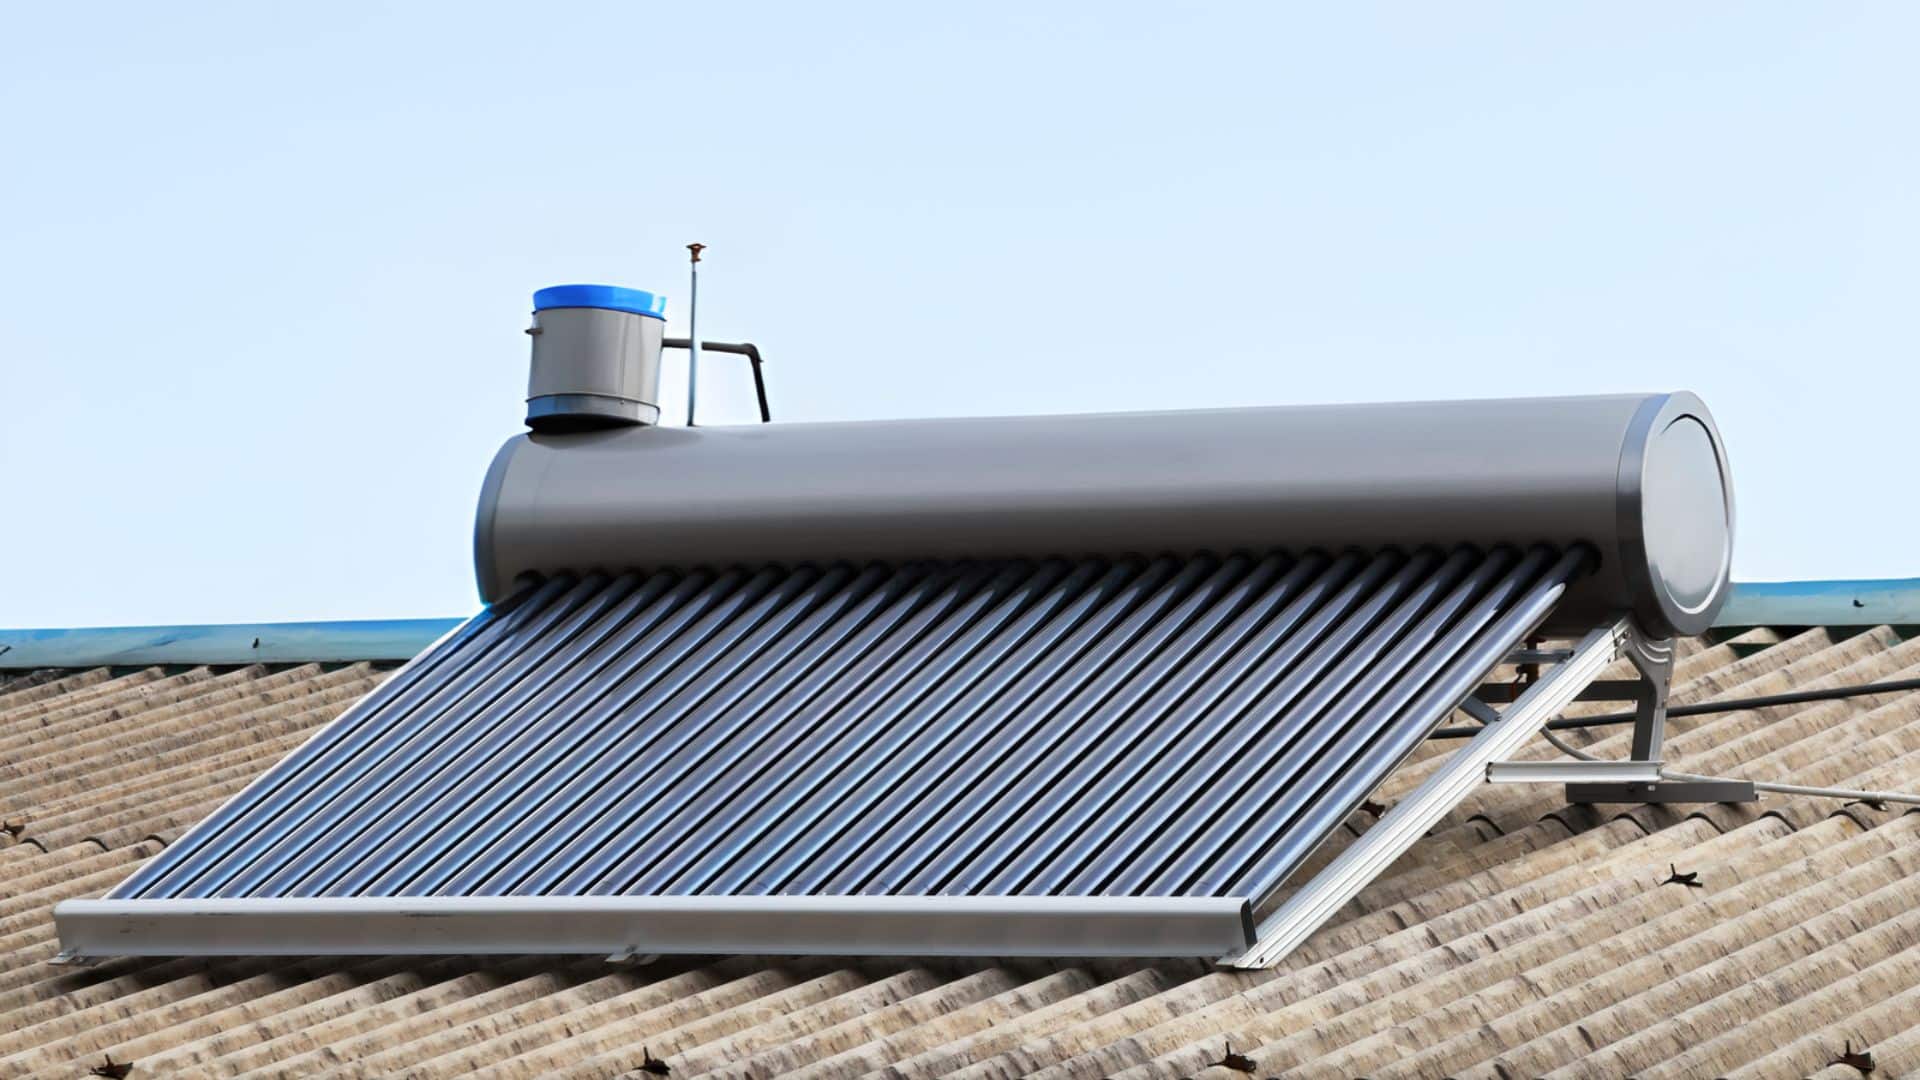 solar hot water system on roof top. Plumbers in Mullumbimby